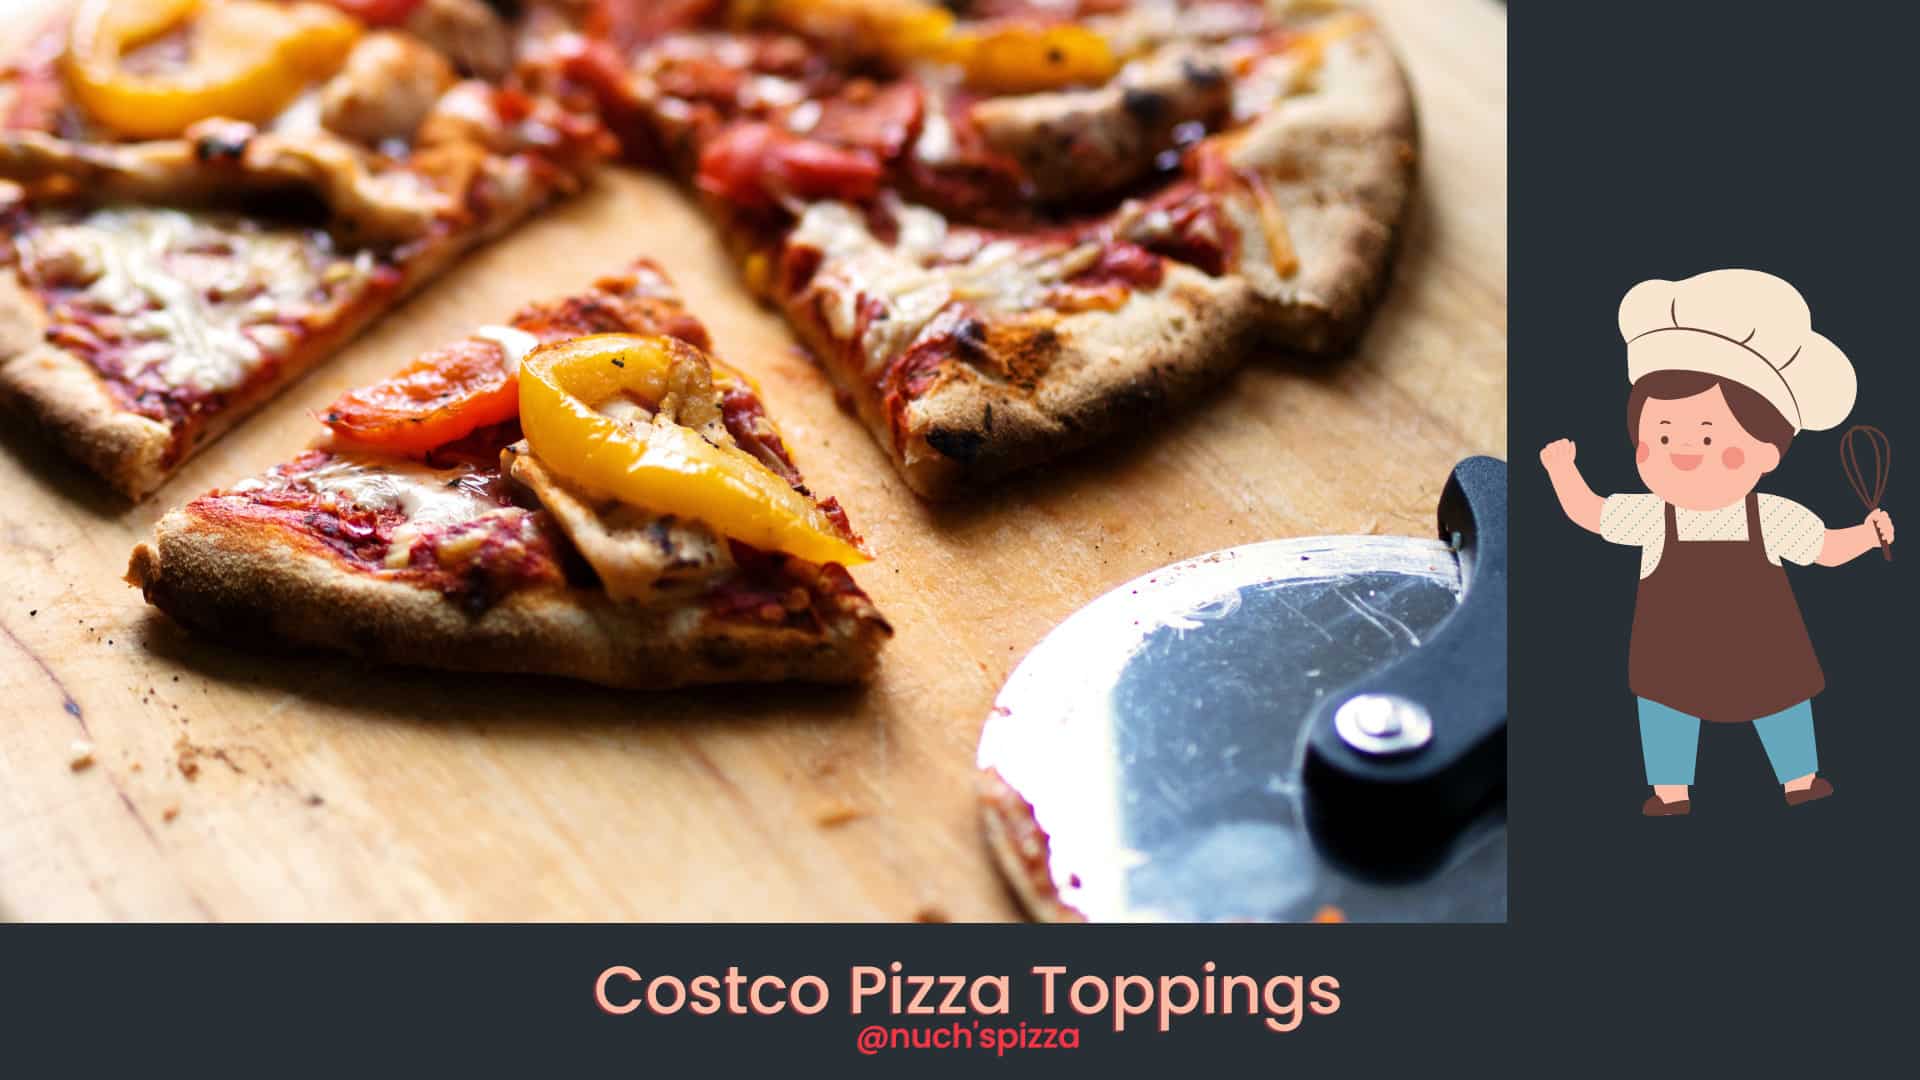 Costco pizza toppings